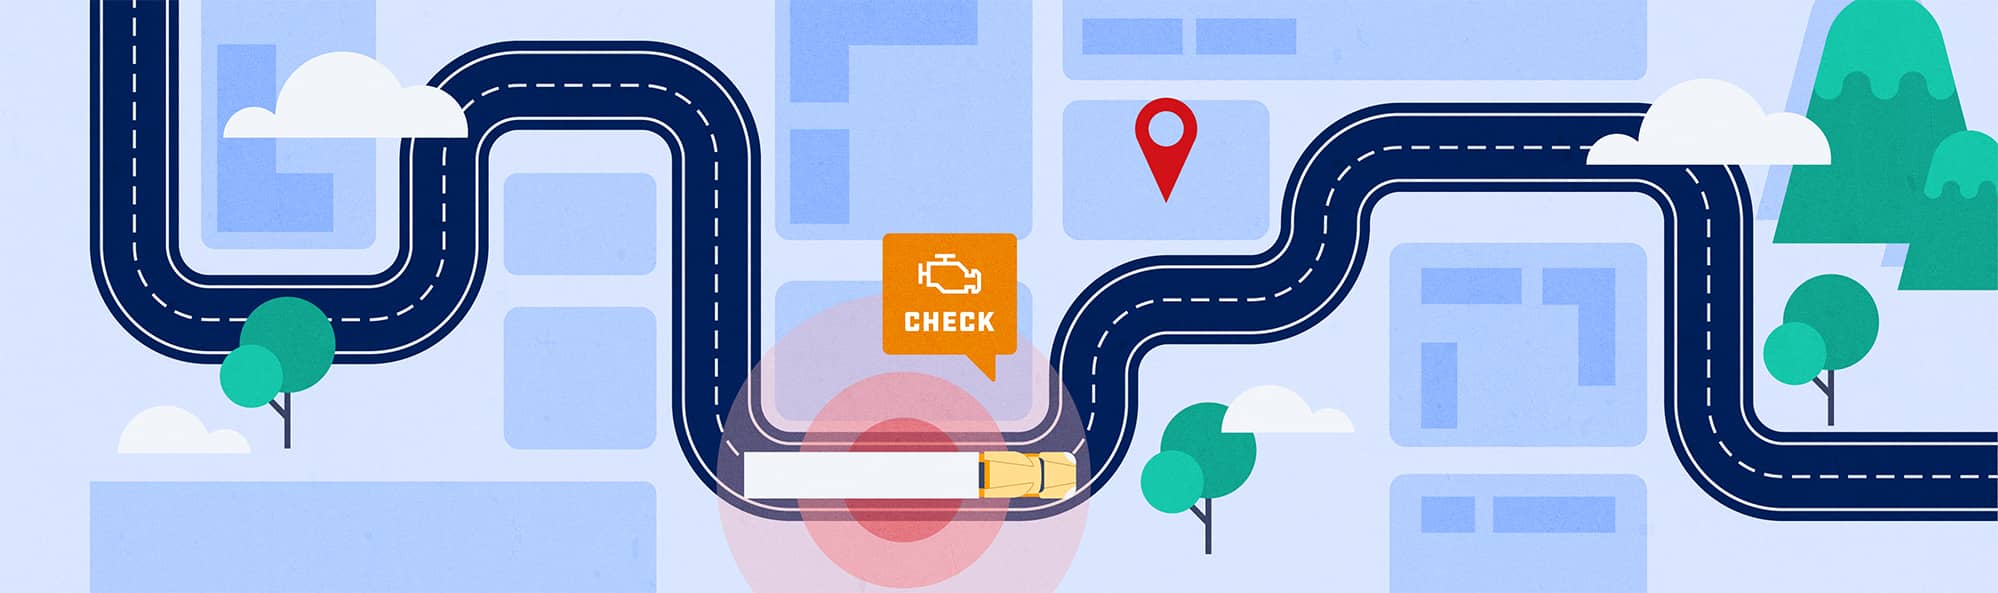 Telematics: How Fullbay’s GPS Integration Can Help Your Shop